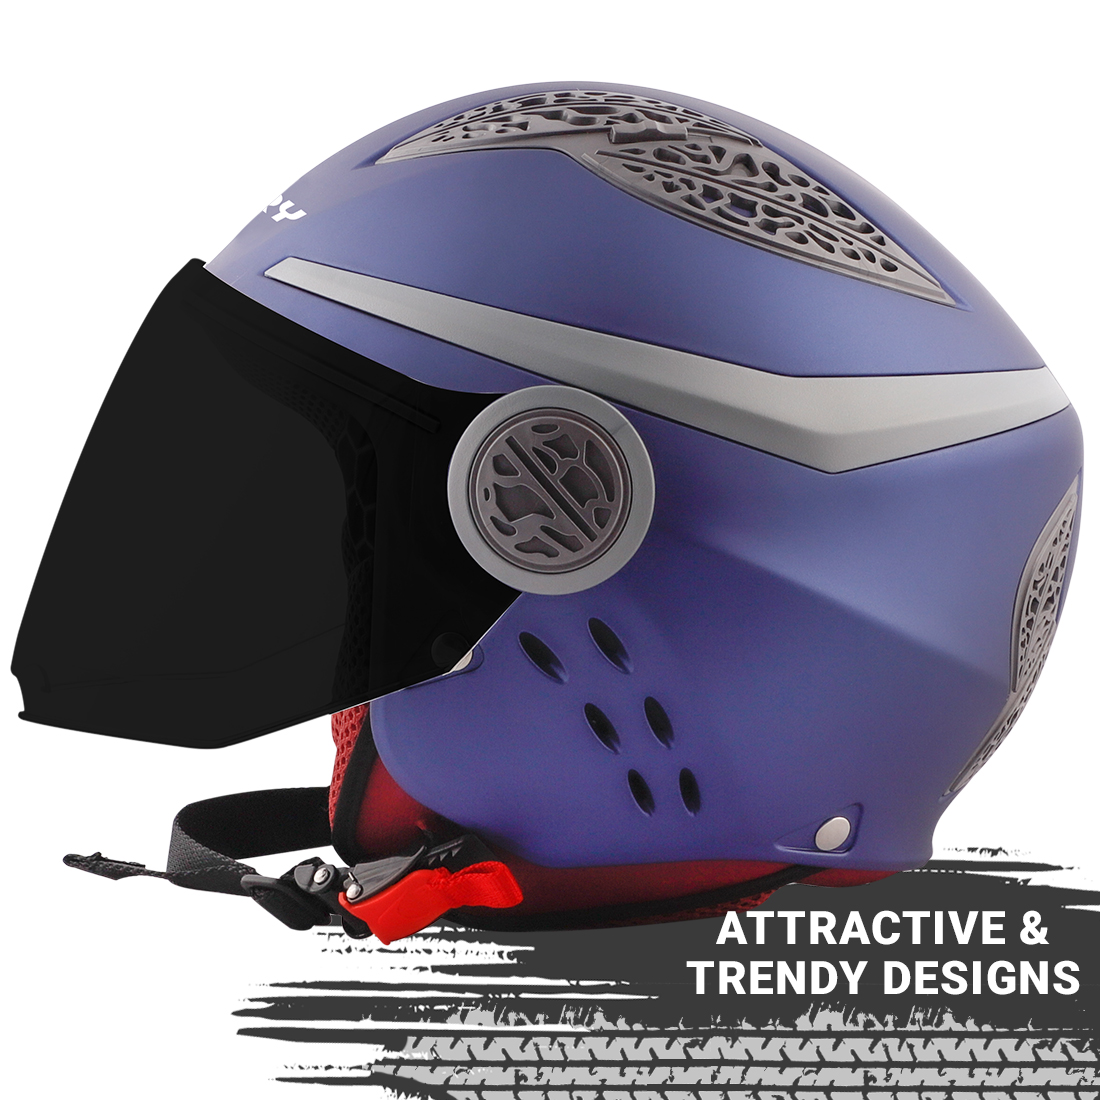 Steelbird Fairy Specially Designed ISI Certified Helmet For Girls || Womens  (Glossy H. Blue With Smoke Visor)